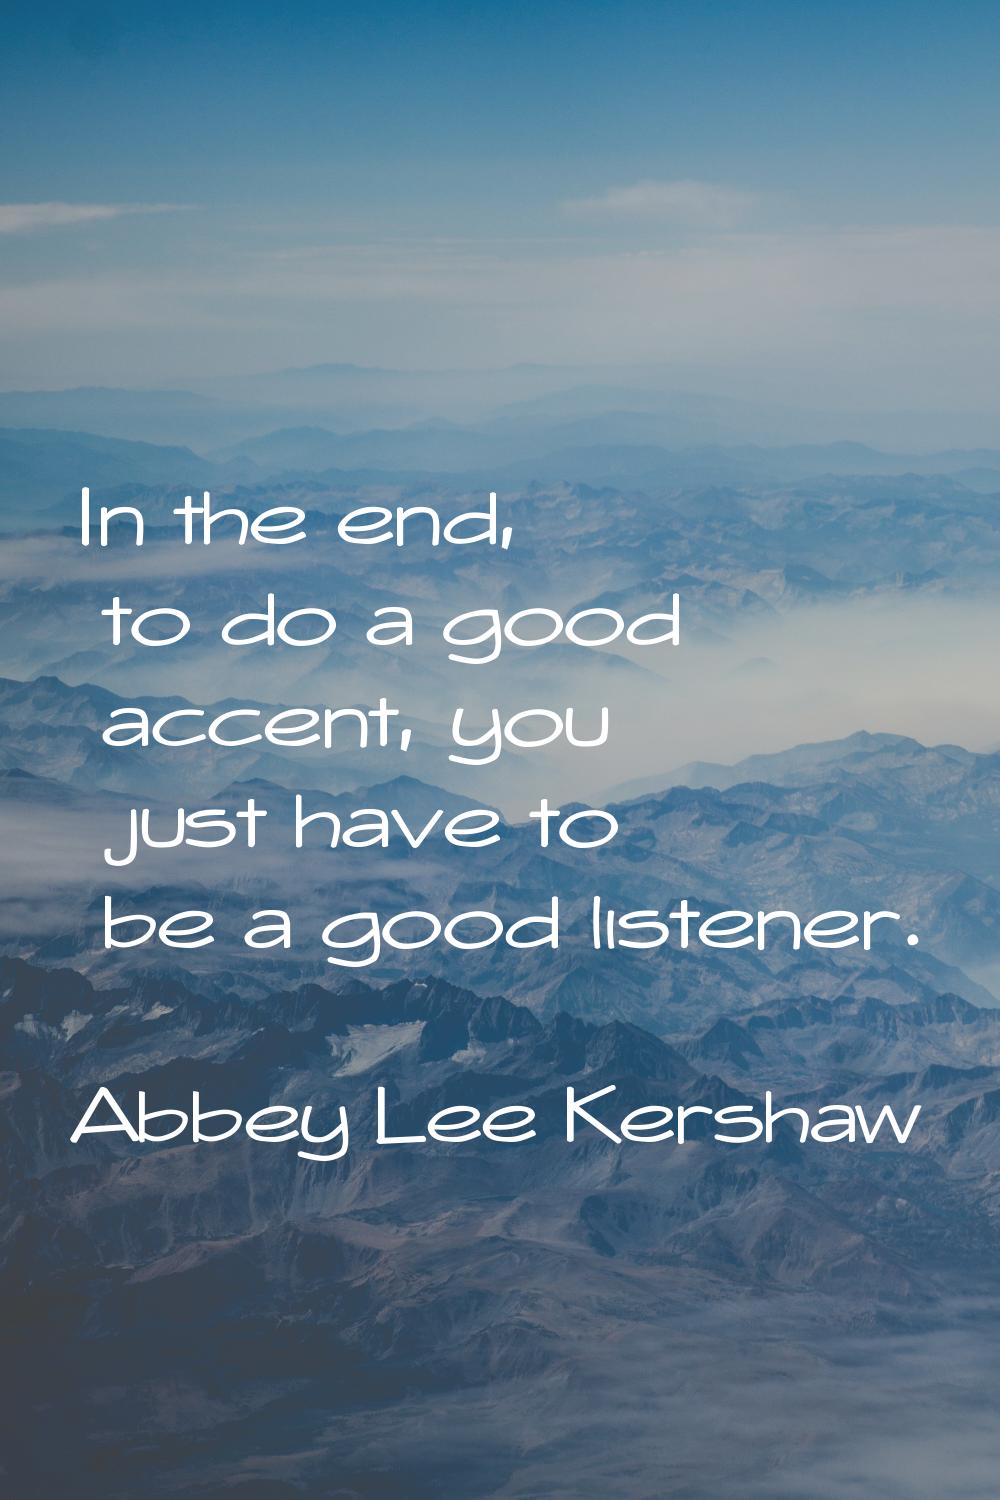 In the end, to do a good accent, you just have to be a good listener.